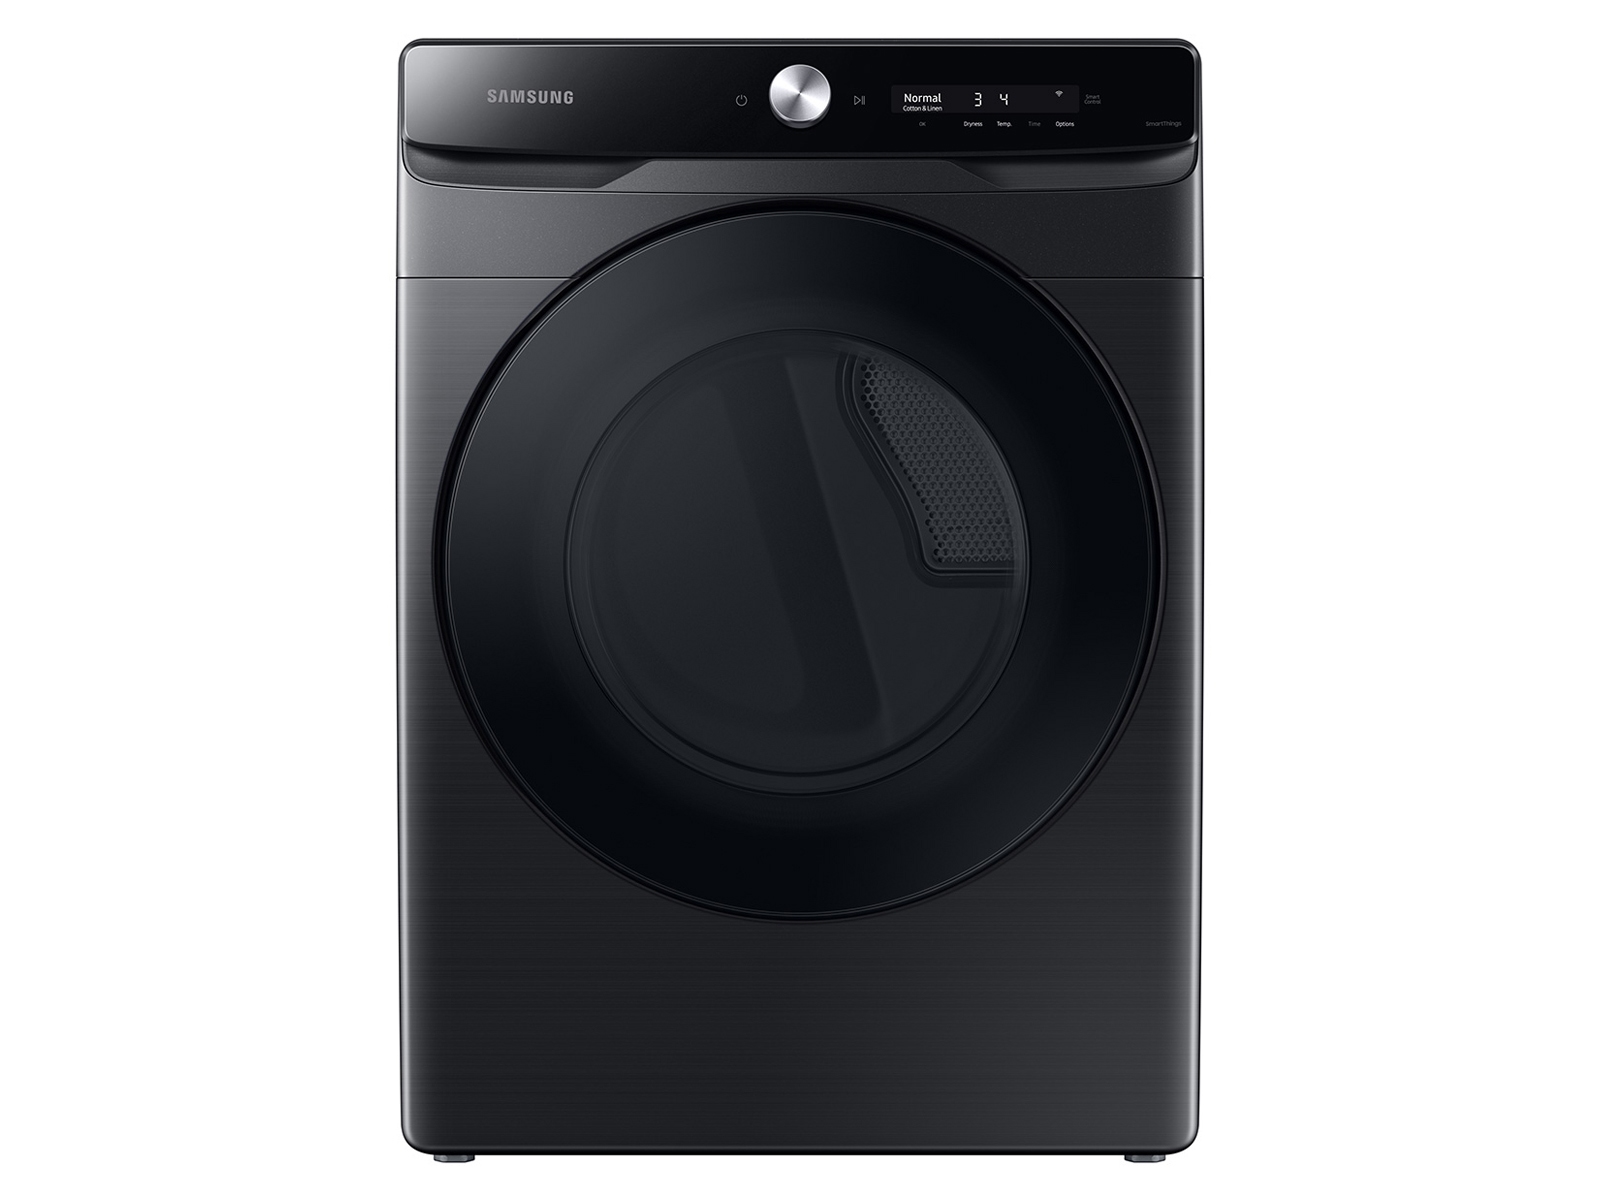 Photos - Tumble Dryer Samsung 7.5 cu. ft. Smart Dial Electric Dryer with Super Speed Dry in Brus 